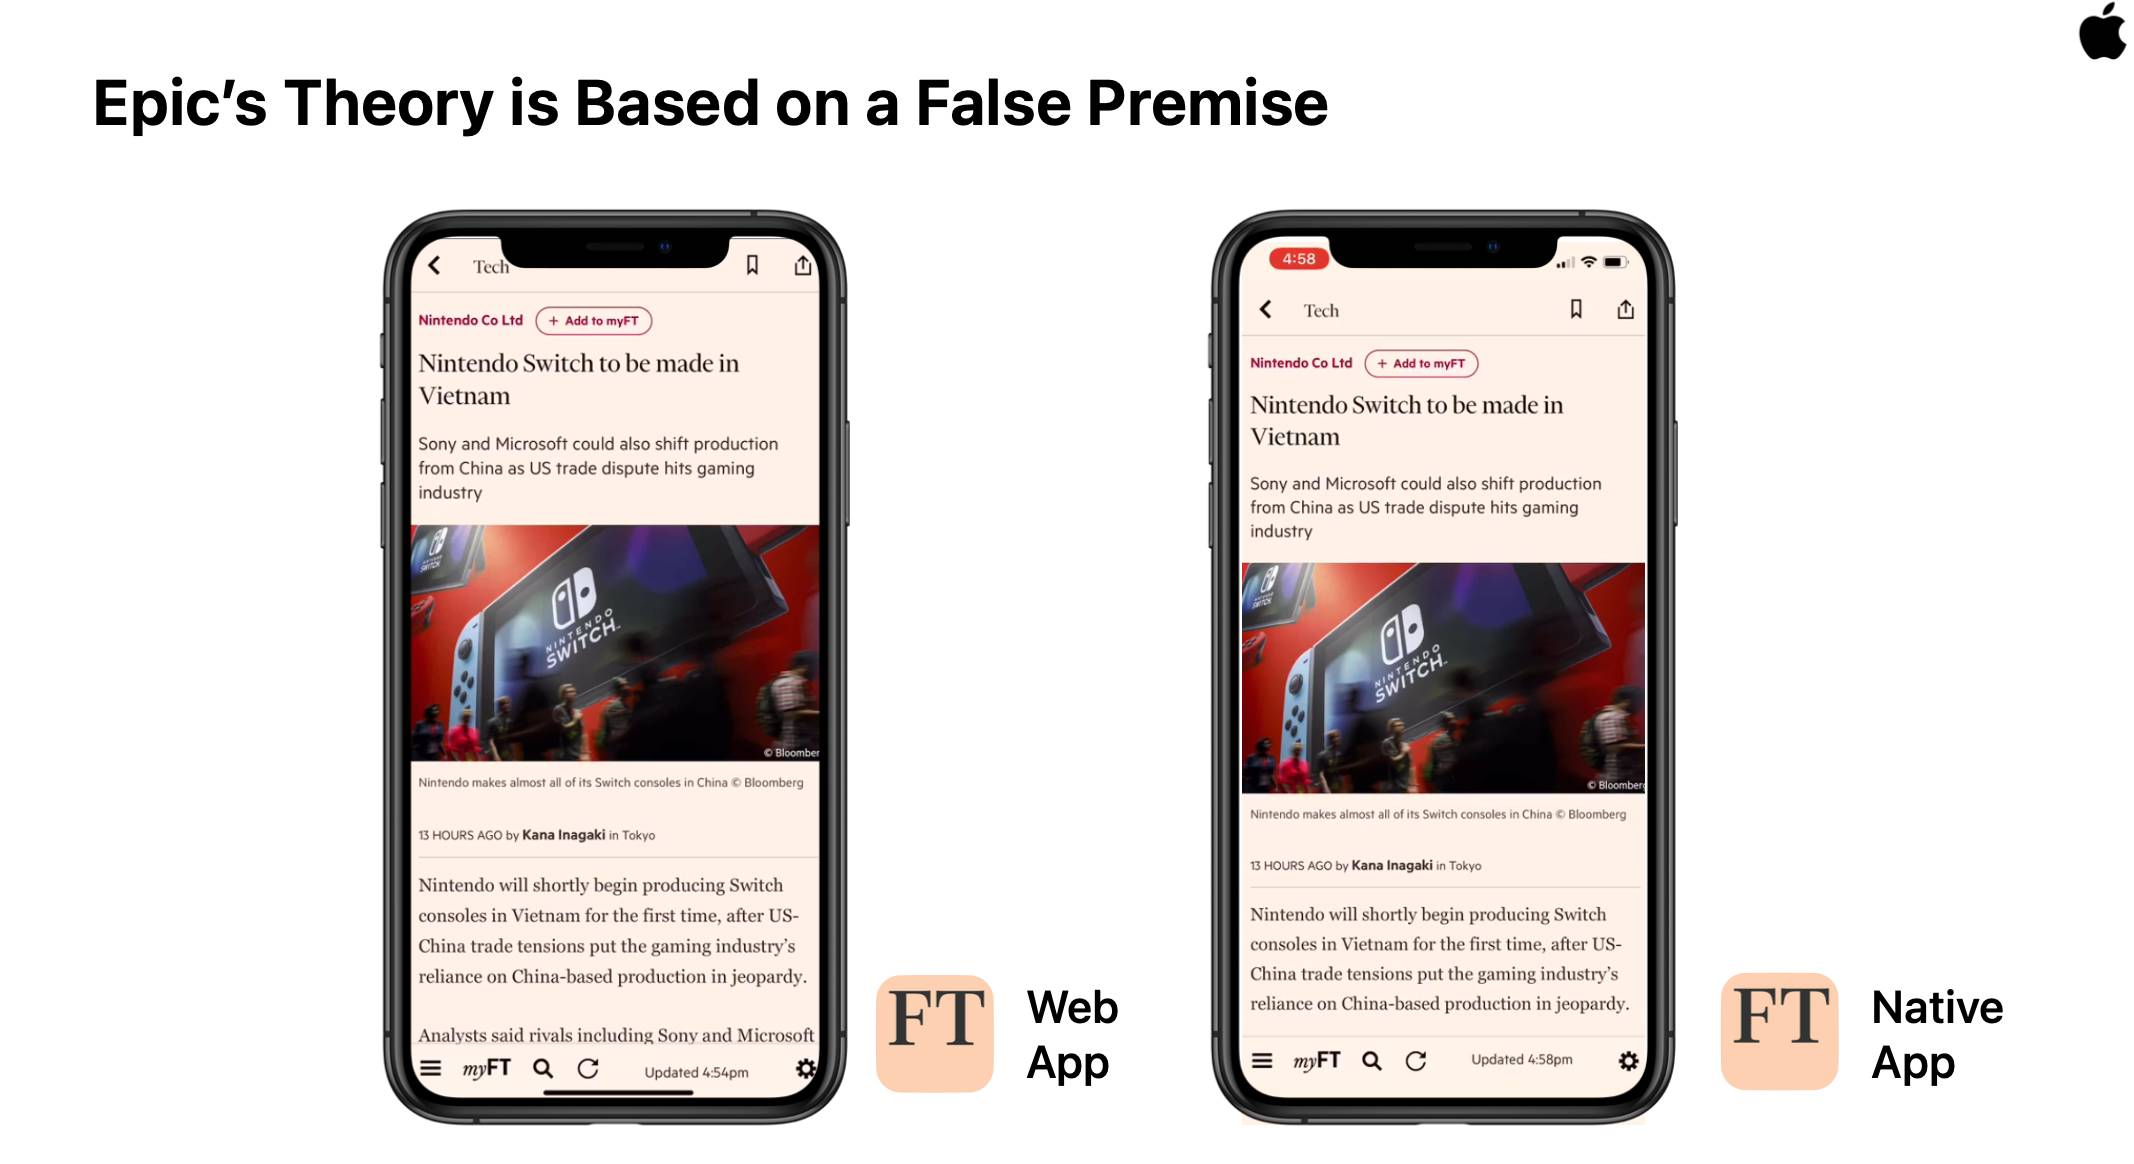 Apple's lawyers <a href='https://twitter.com/slightlylate/status/1389647183457124353?s=20'>mangled a screen capture of the Financial Times (<abbr>FT</abbr>) web app to cover for a deficit of features in Safari and WebKit</a>, inadvertently setting the tone.